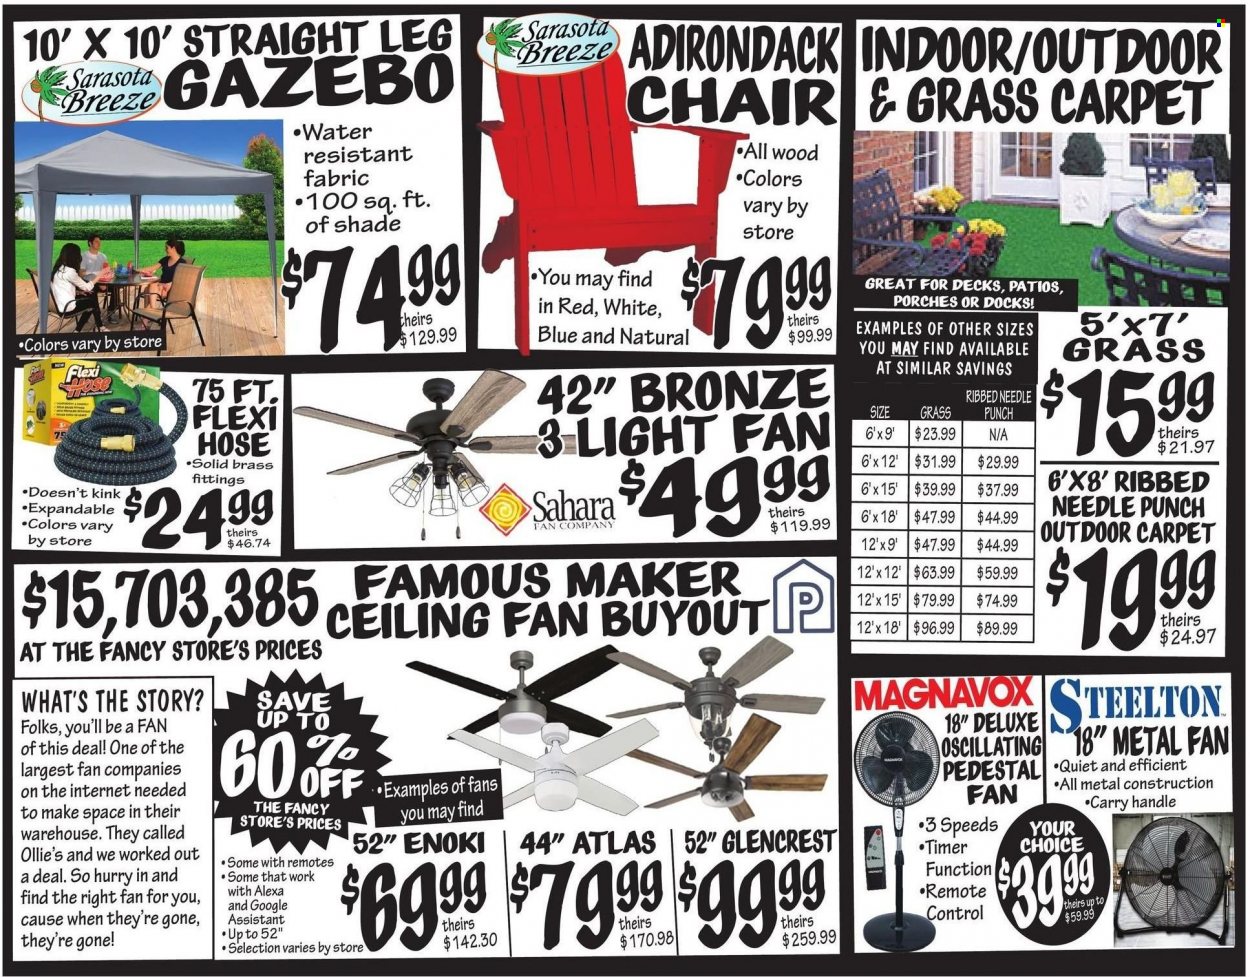 Ollie's Bargain Outlet ad  - 07.06.2022 - 08.11.2022.